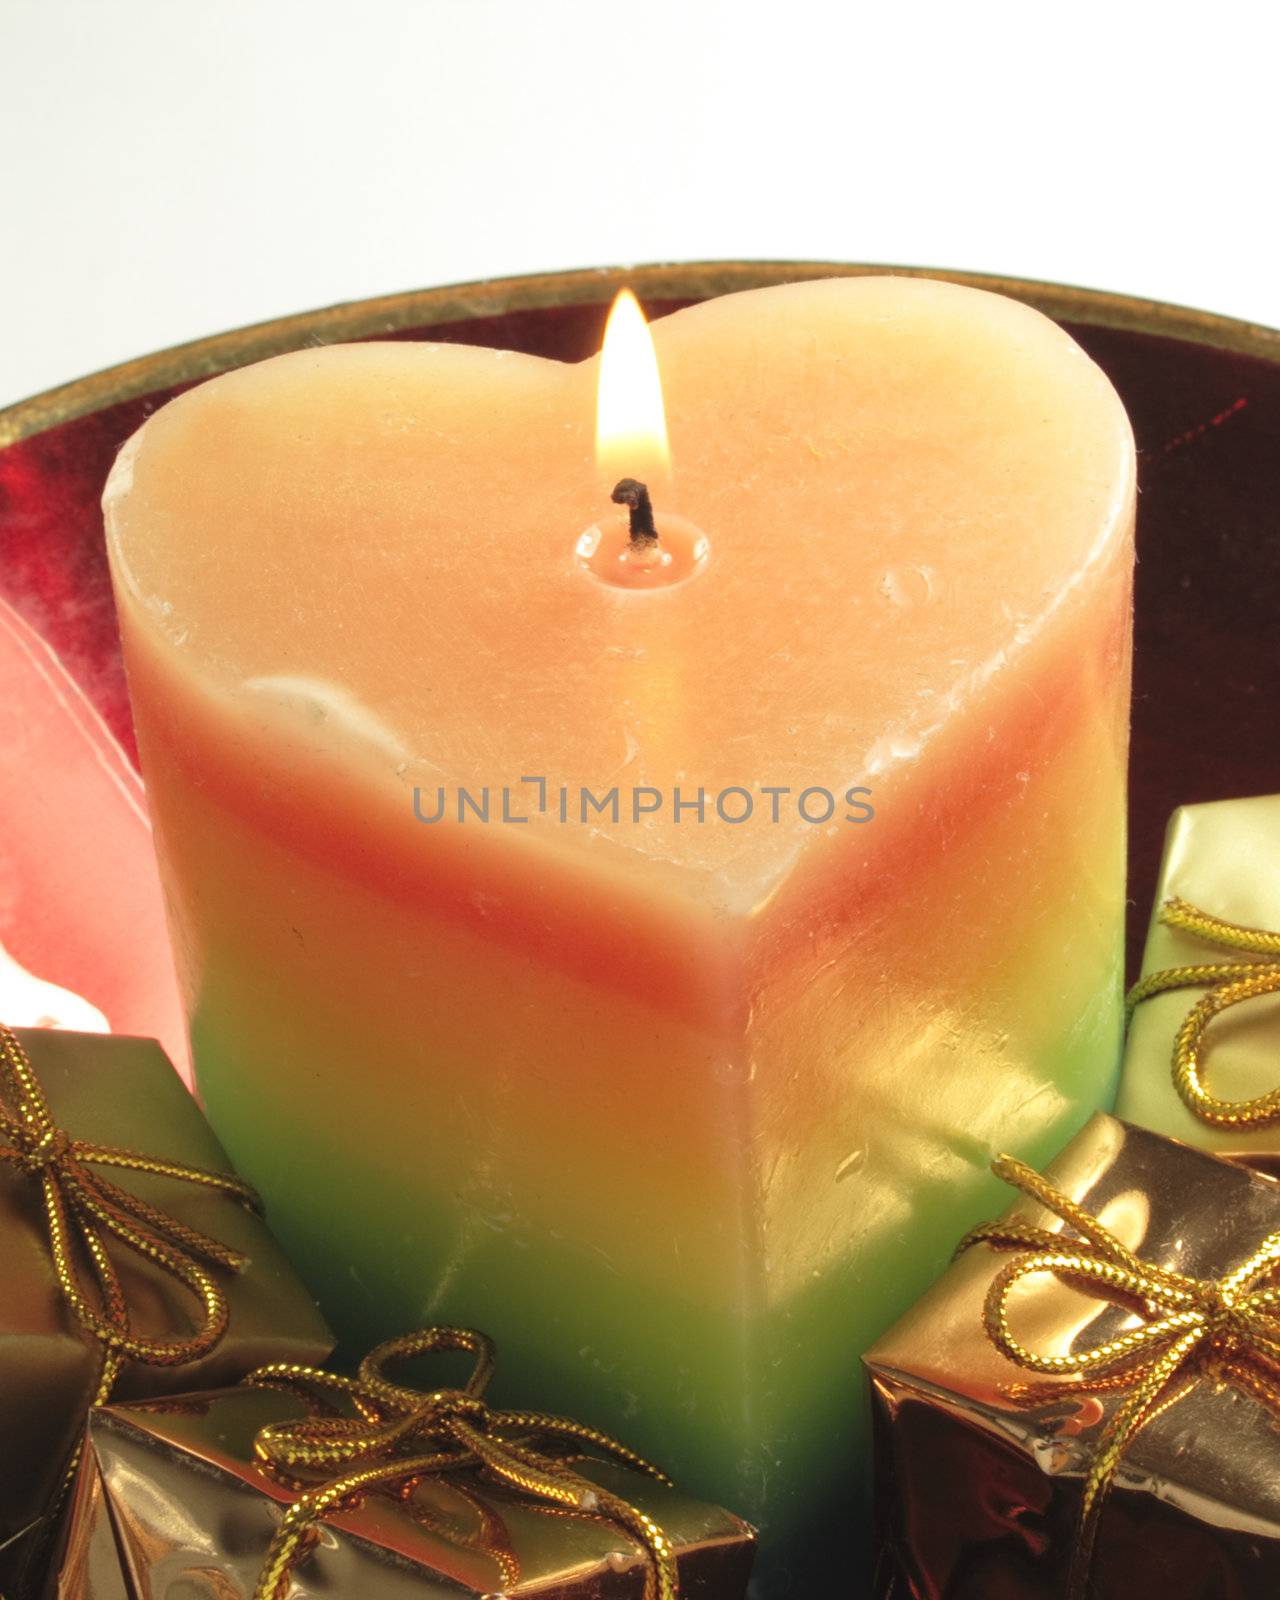 heart shaped candle and gold presents in a red glass bowl